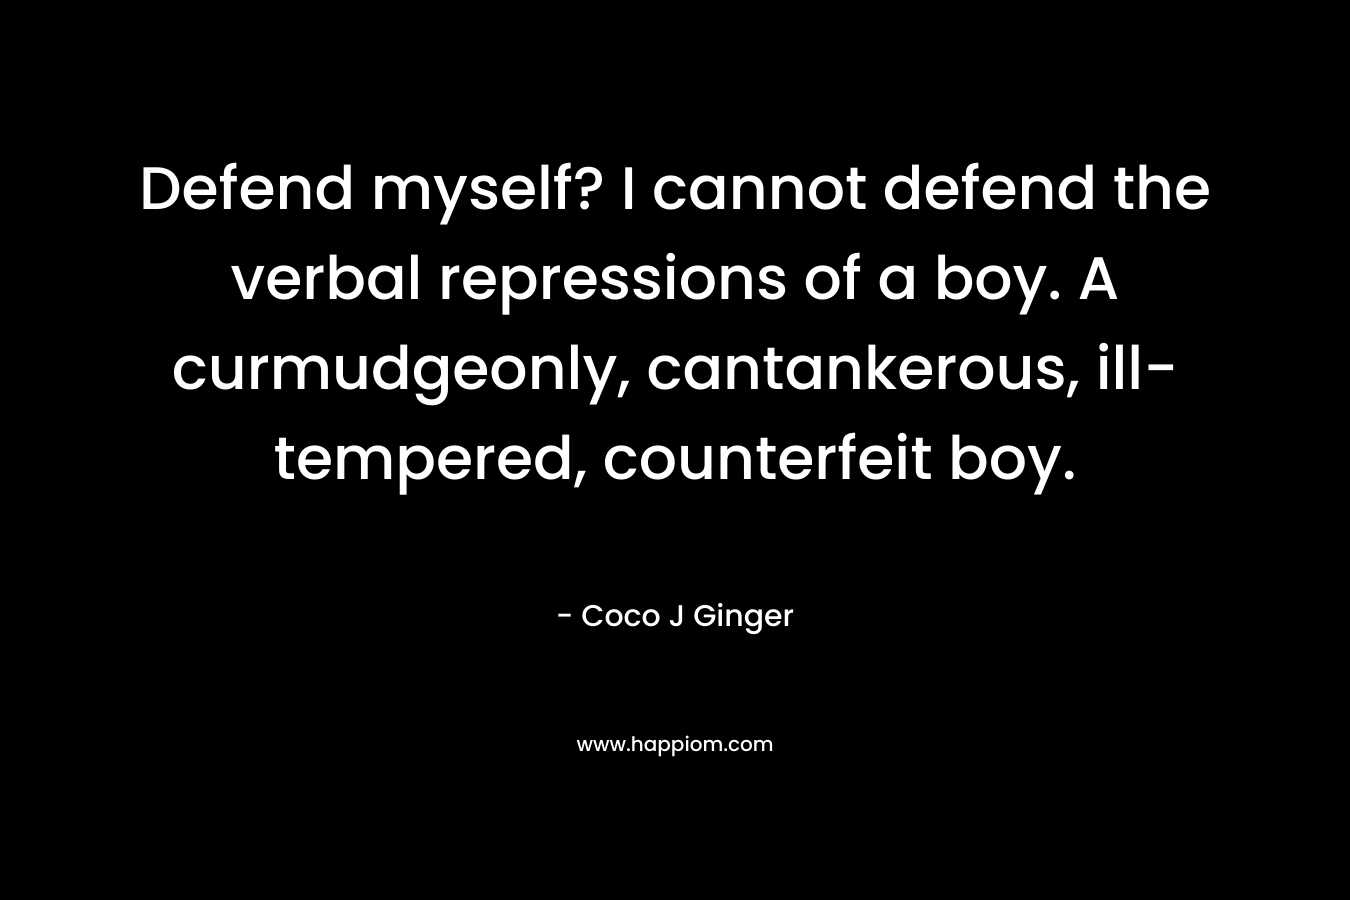 Defend myself? I cannot defend the verbal repressions of a boy. A curmudgeonly, cantankerous, ill-tempered, counterfeit boy.